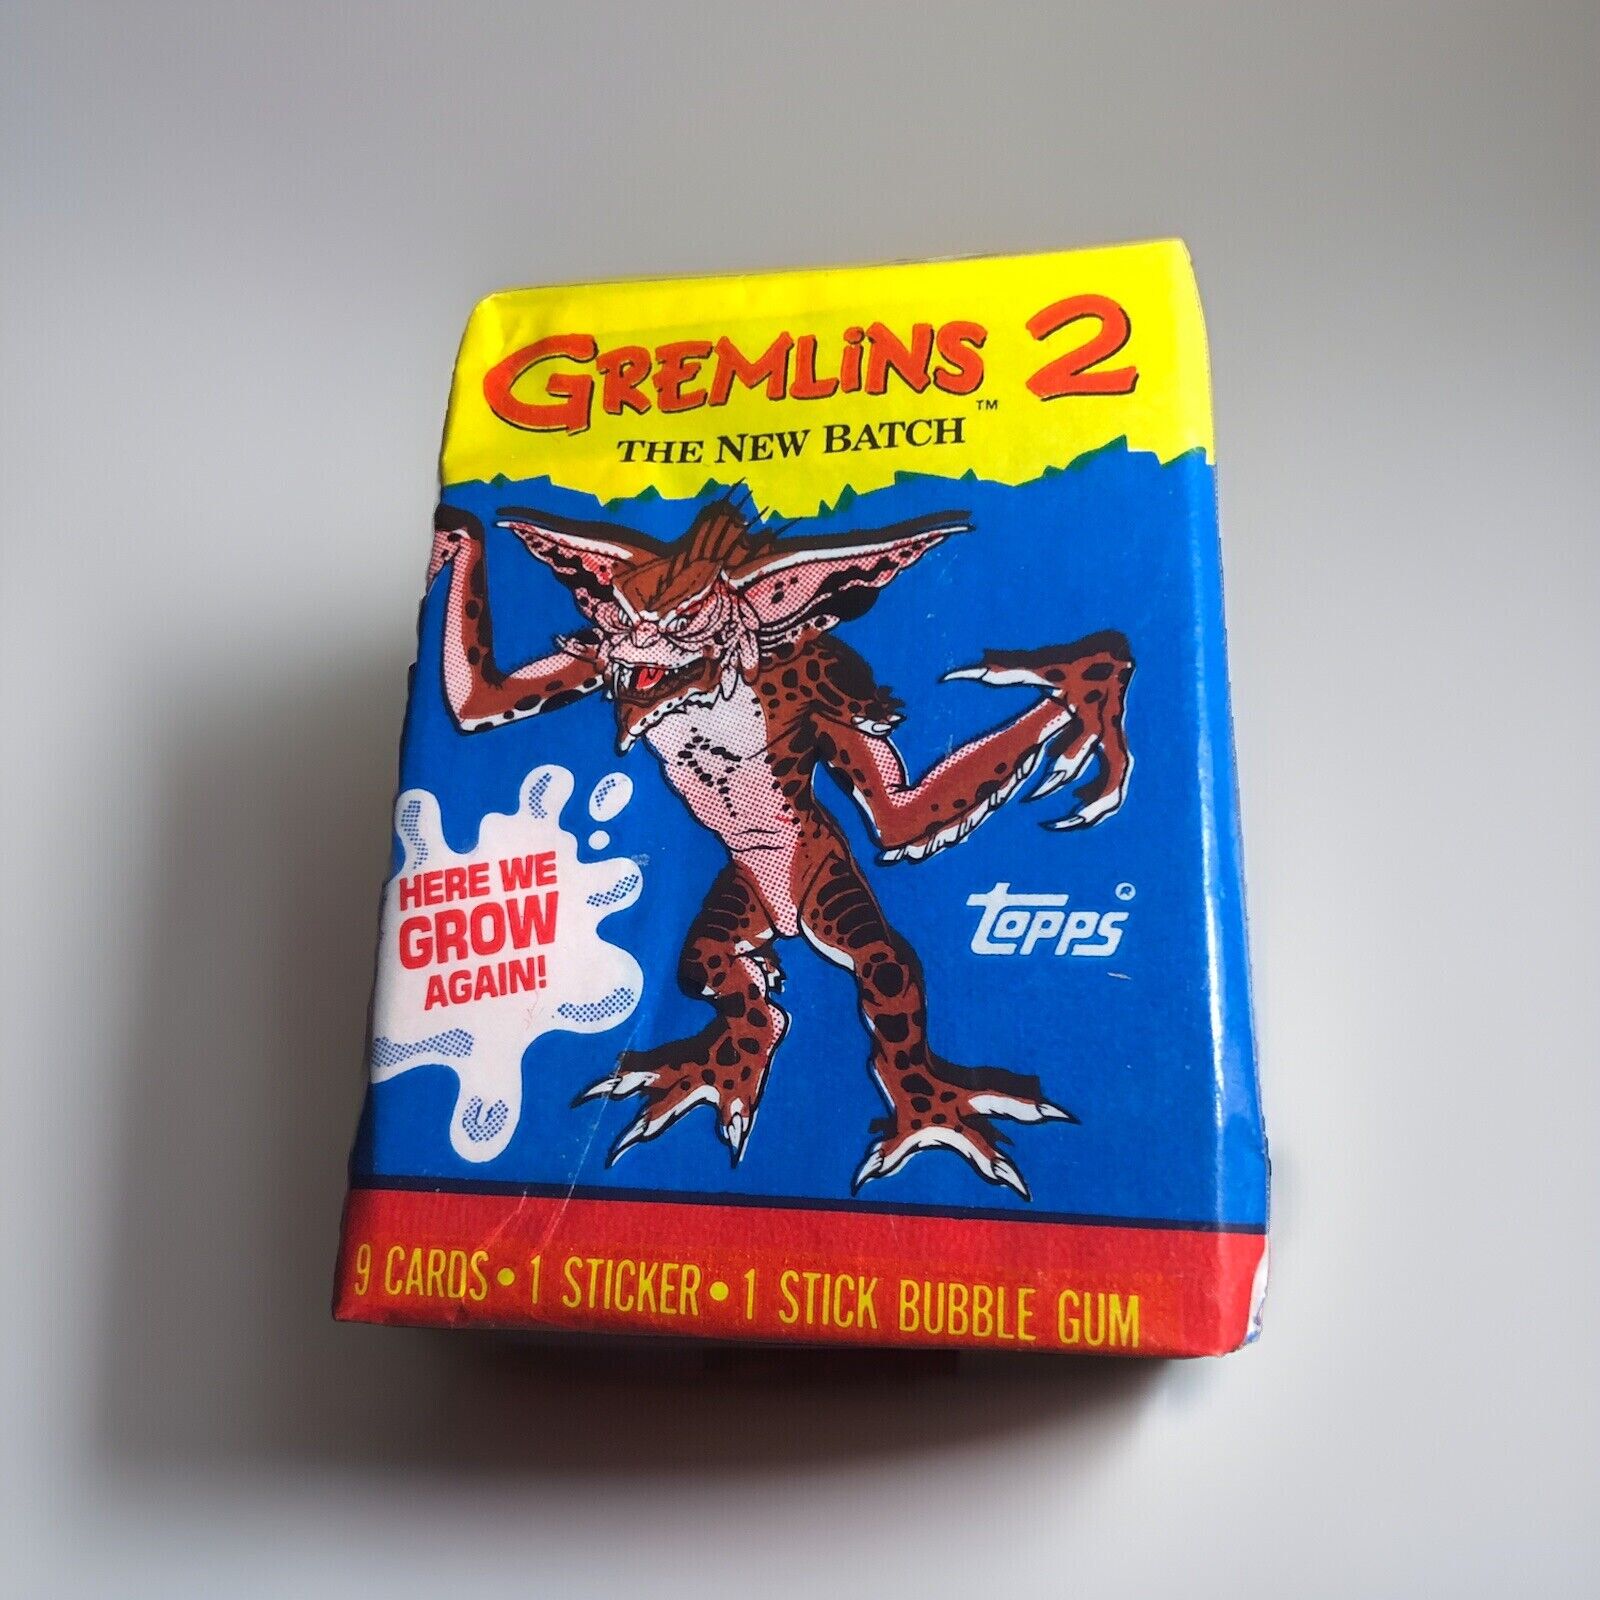 GREMLINS 2 1990 Topps UNOPENED trading card Wax Pack w/gum NEW Vintage